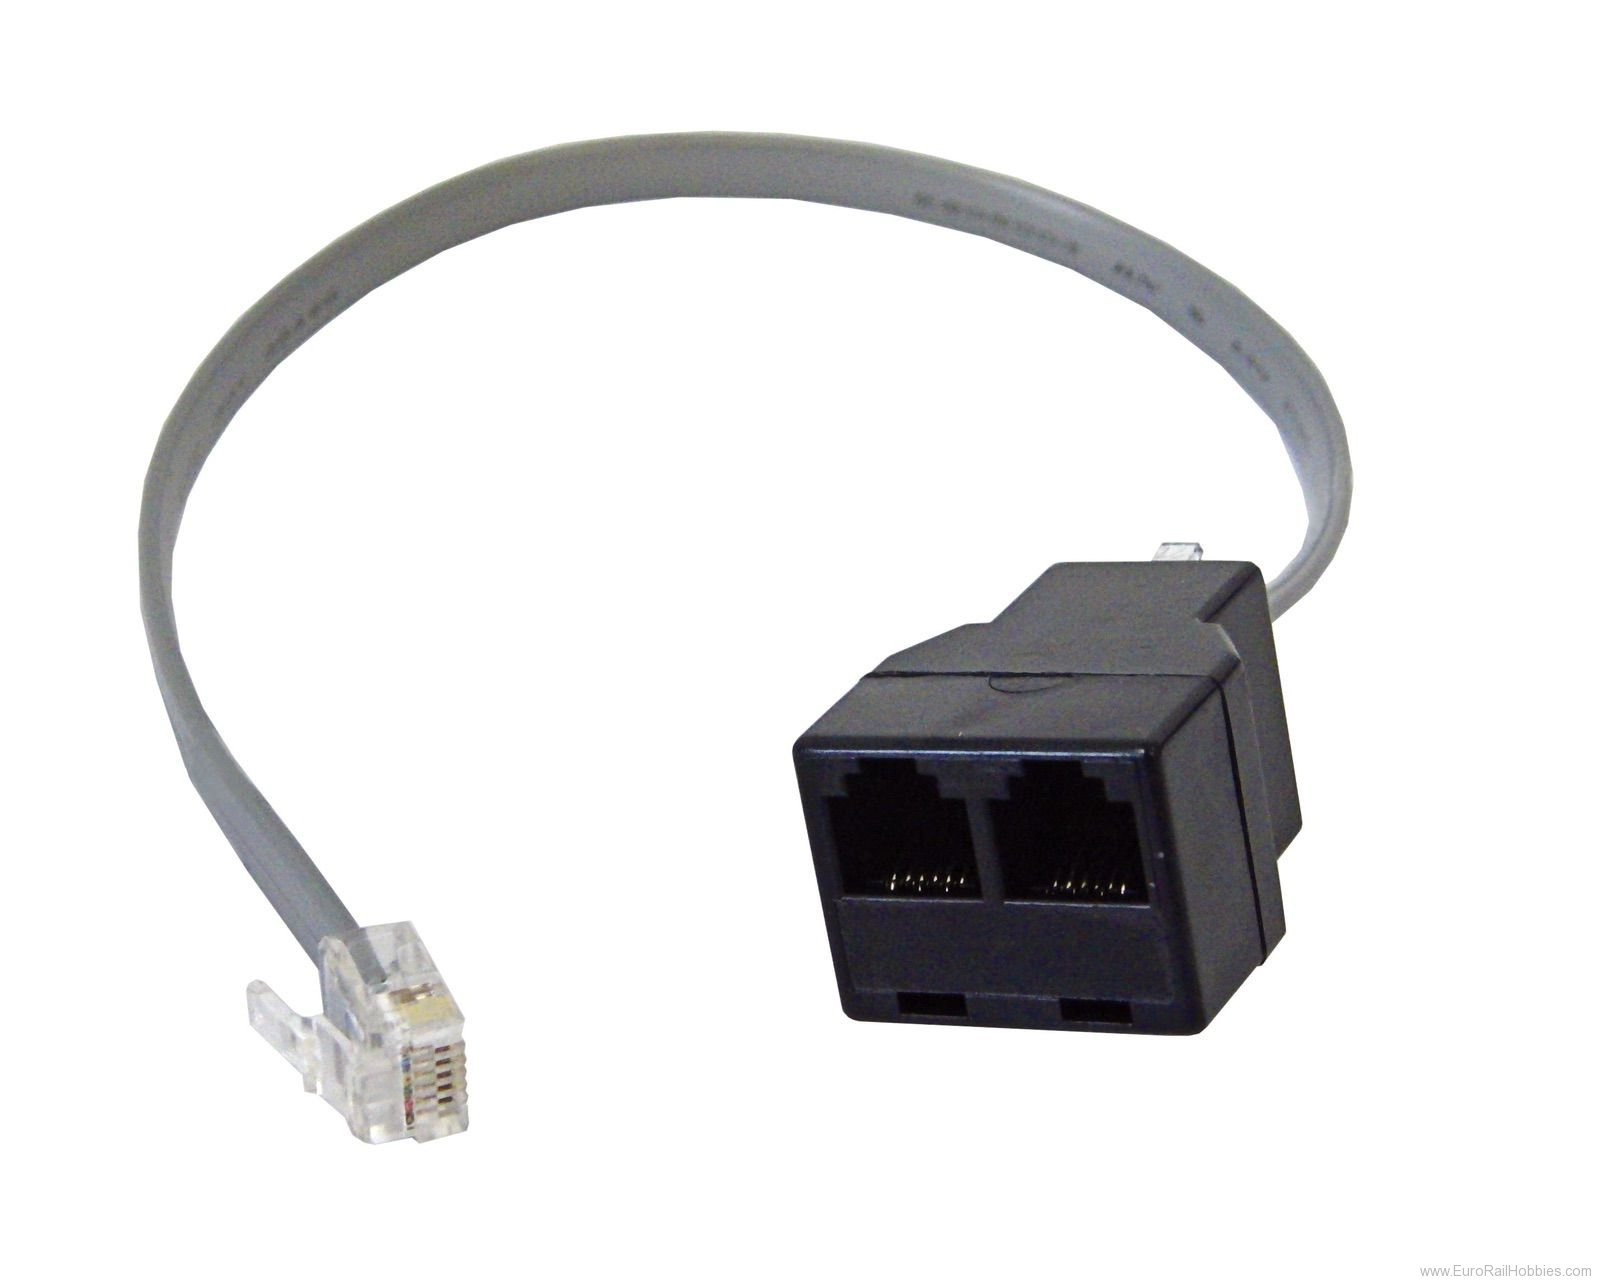 Piko 55018 Y-Cable (1xPlug,2xSocket) for PIKO Smart cont